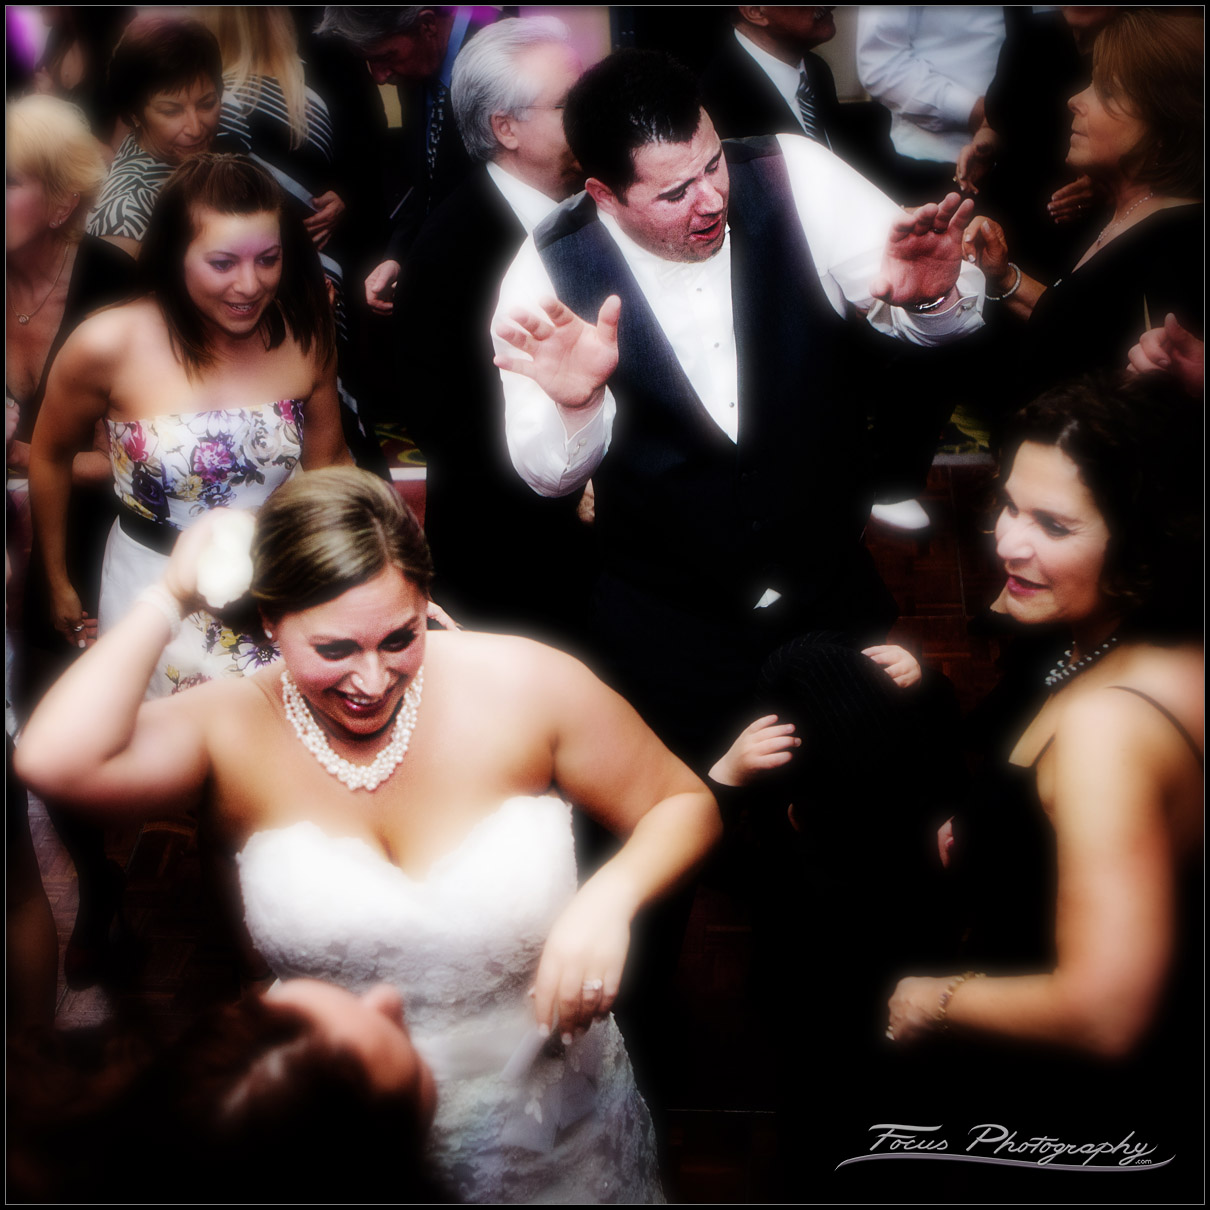 Bride and Groom dancing with guests